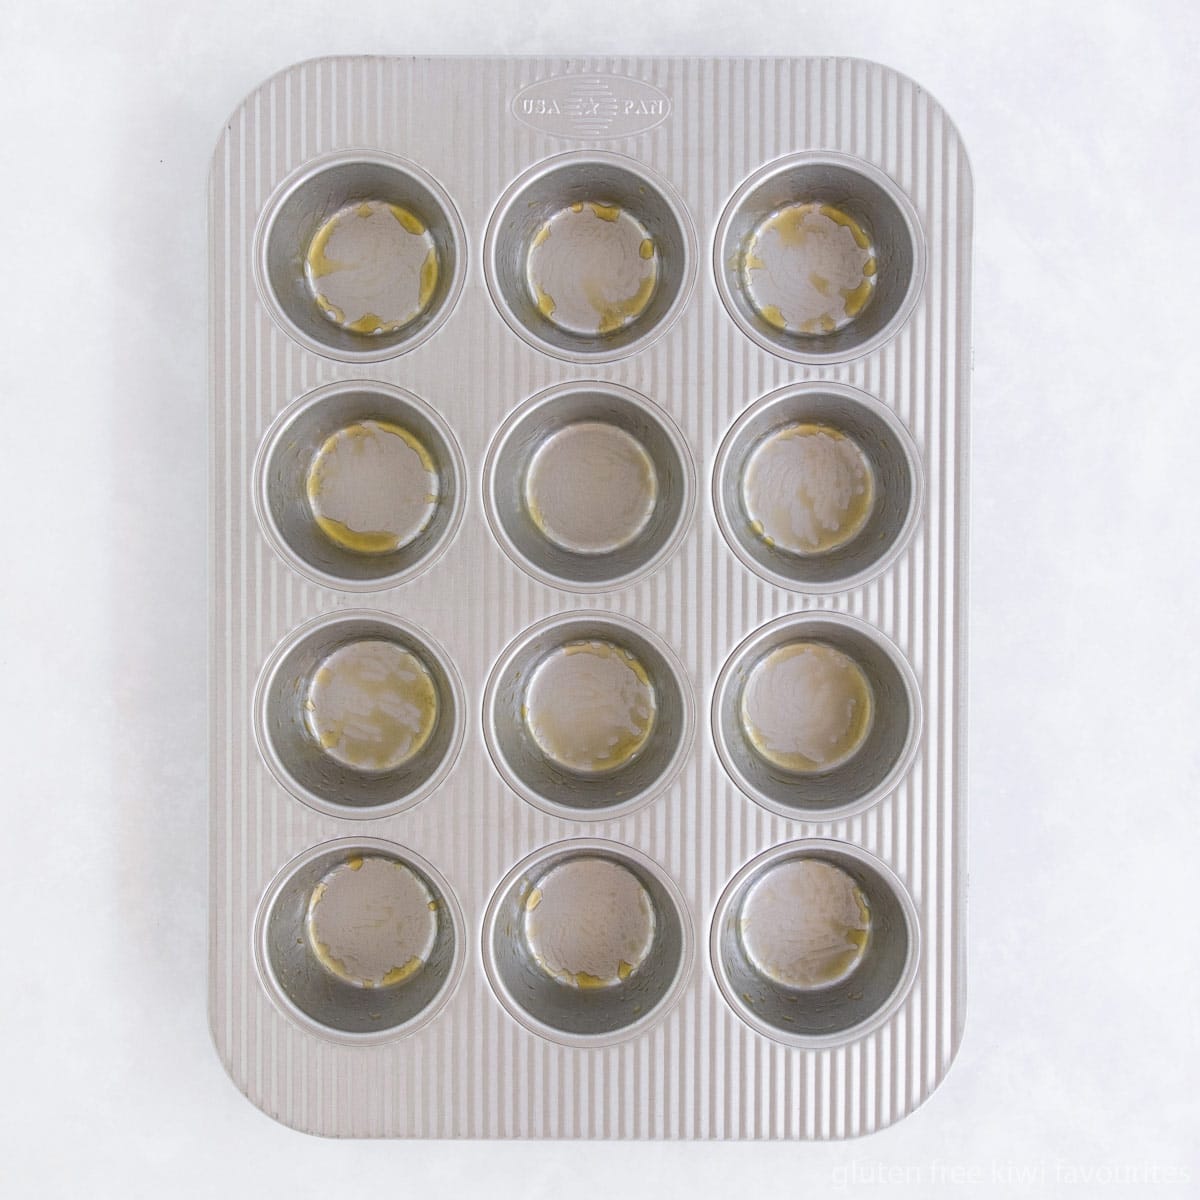 A light metal muffin pan greased with butter.